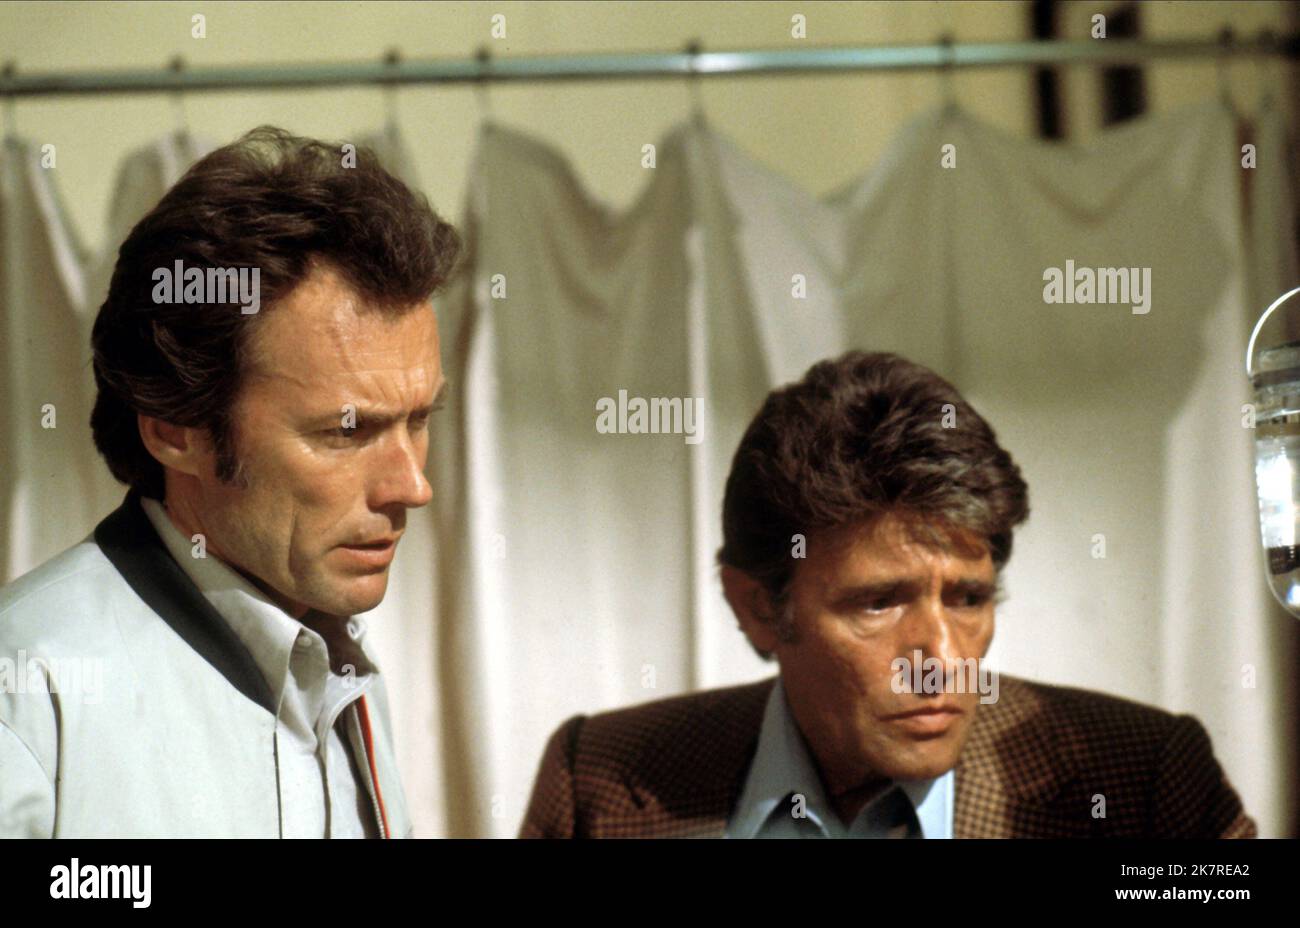 Dirty Harry: A Model Cop or A Symbol of Unchecked Aggression